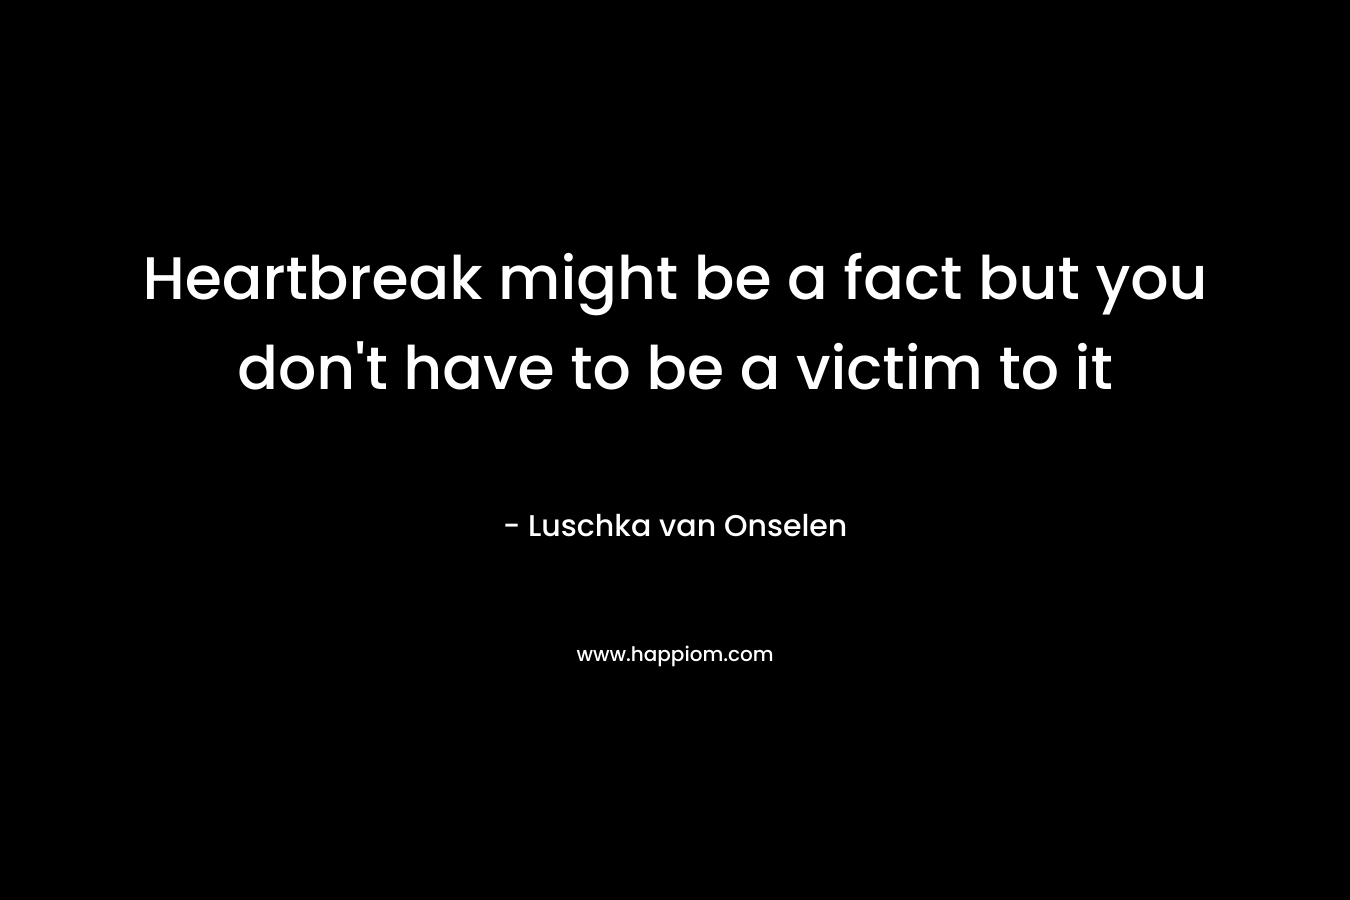 Heartbreak might be a fact but you don't have to be a victim to it